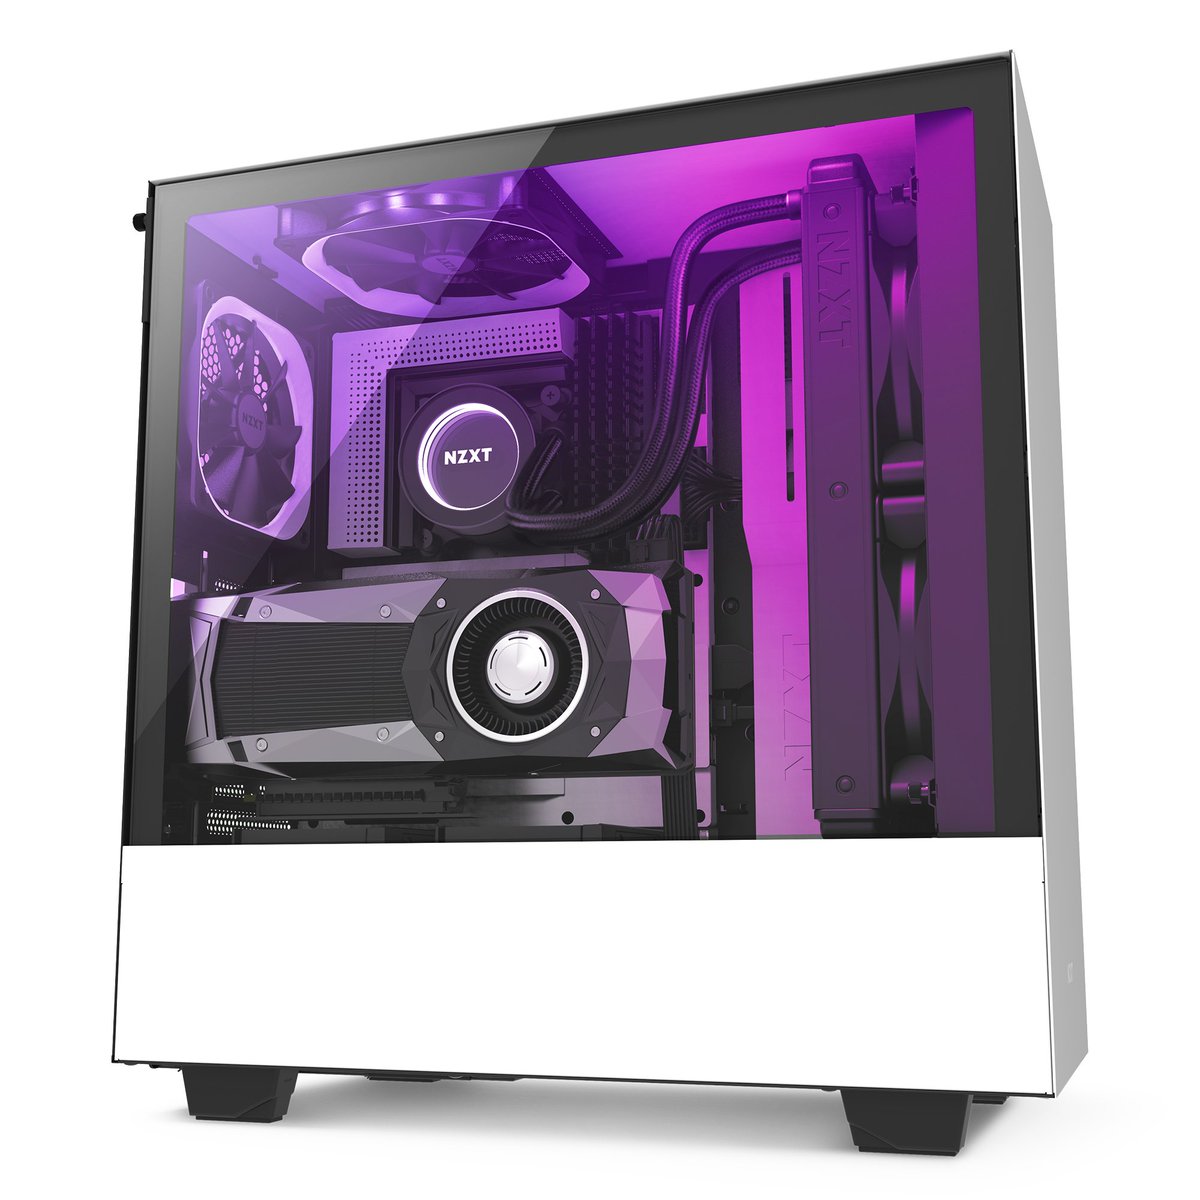 Twitter our new h500i case includes a vertical gpu mount :) https://t.co/rIk0TGry0H" / Twitter